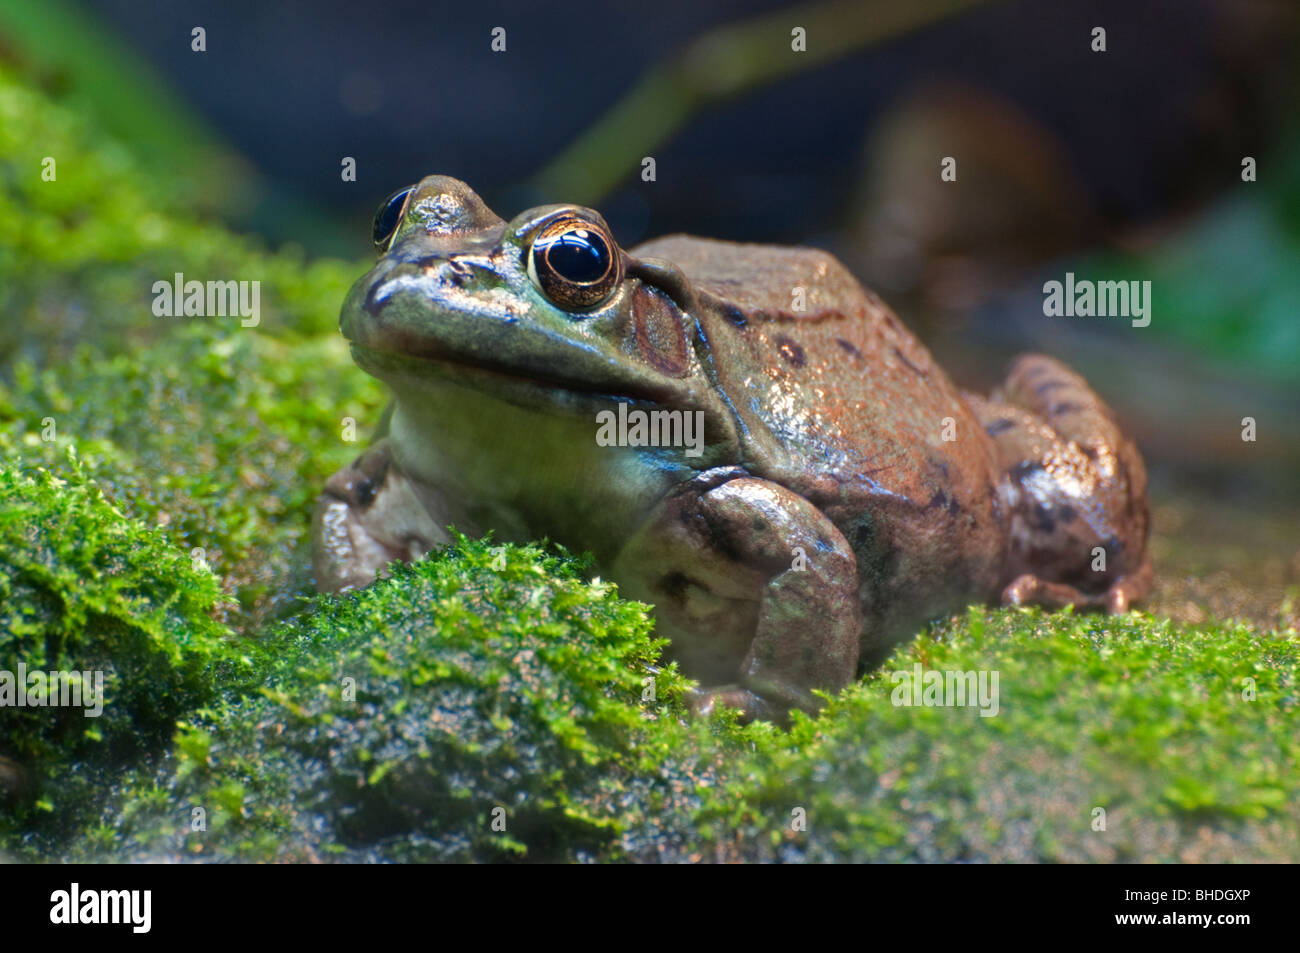 Close-up of a Green Frog Stock Photo